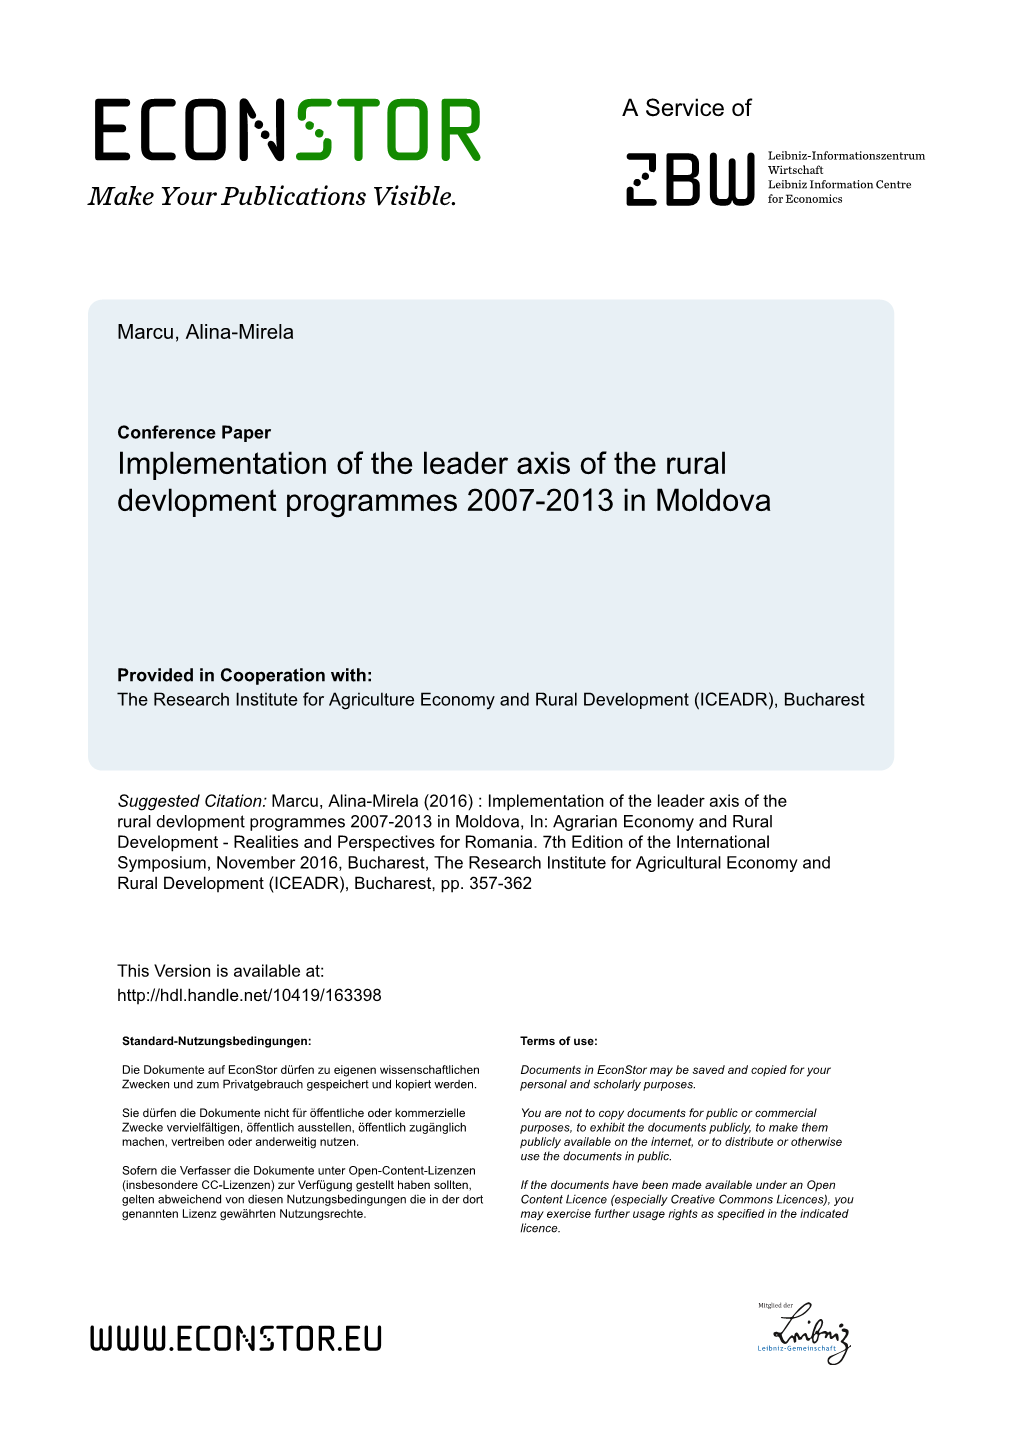 Implementation of the Leader Axis of the Rural Devlopment Programmes 2007-2013 in Moldova